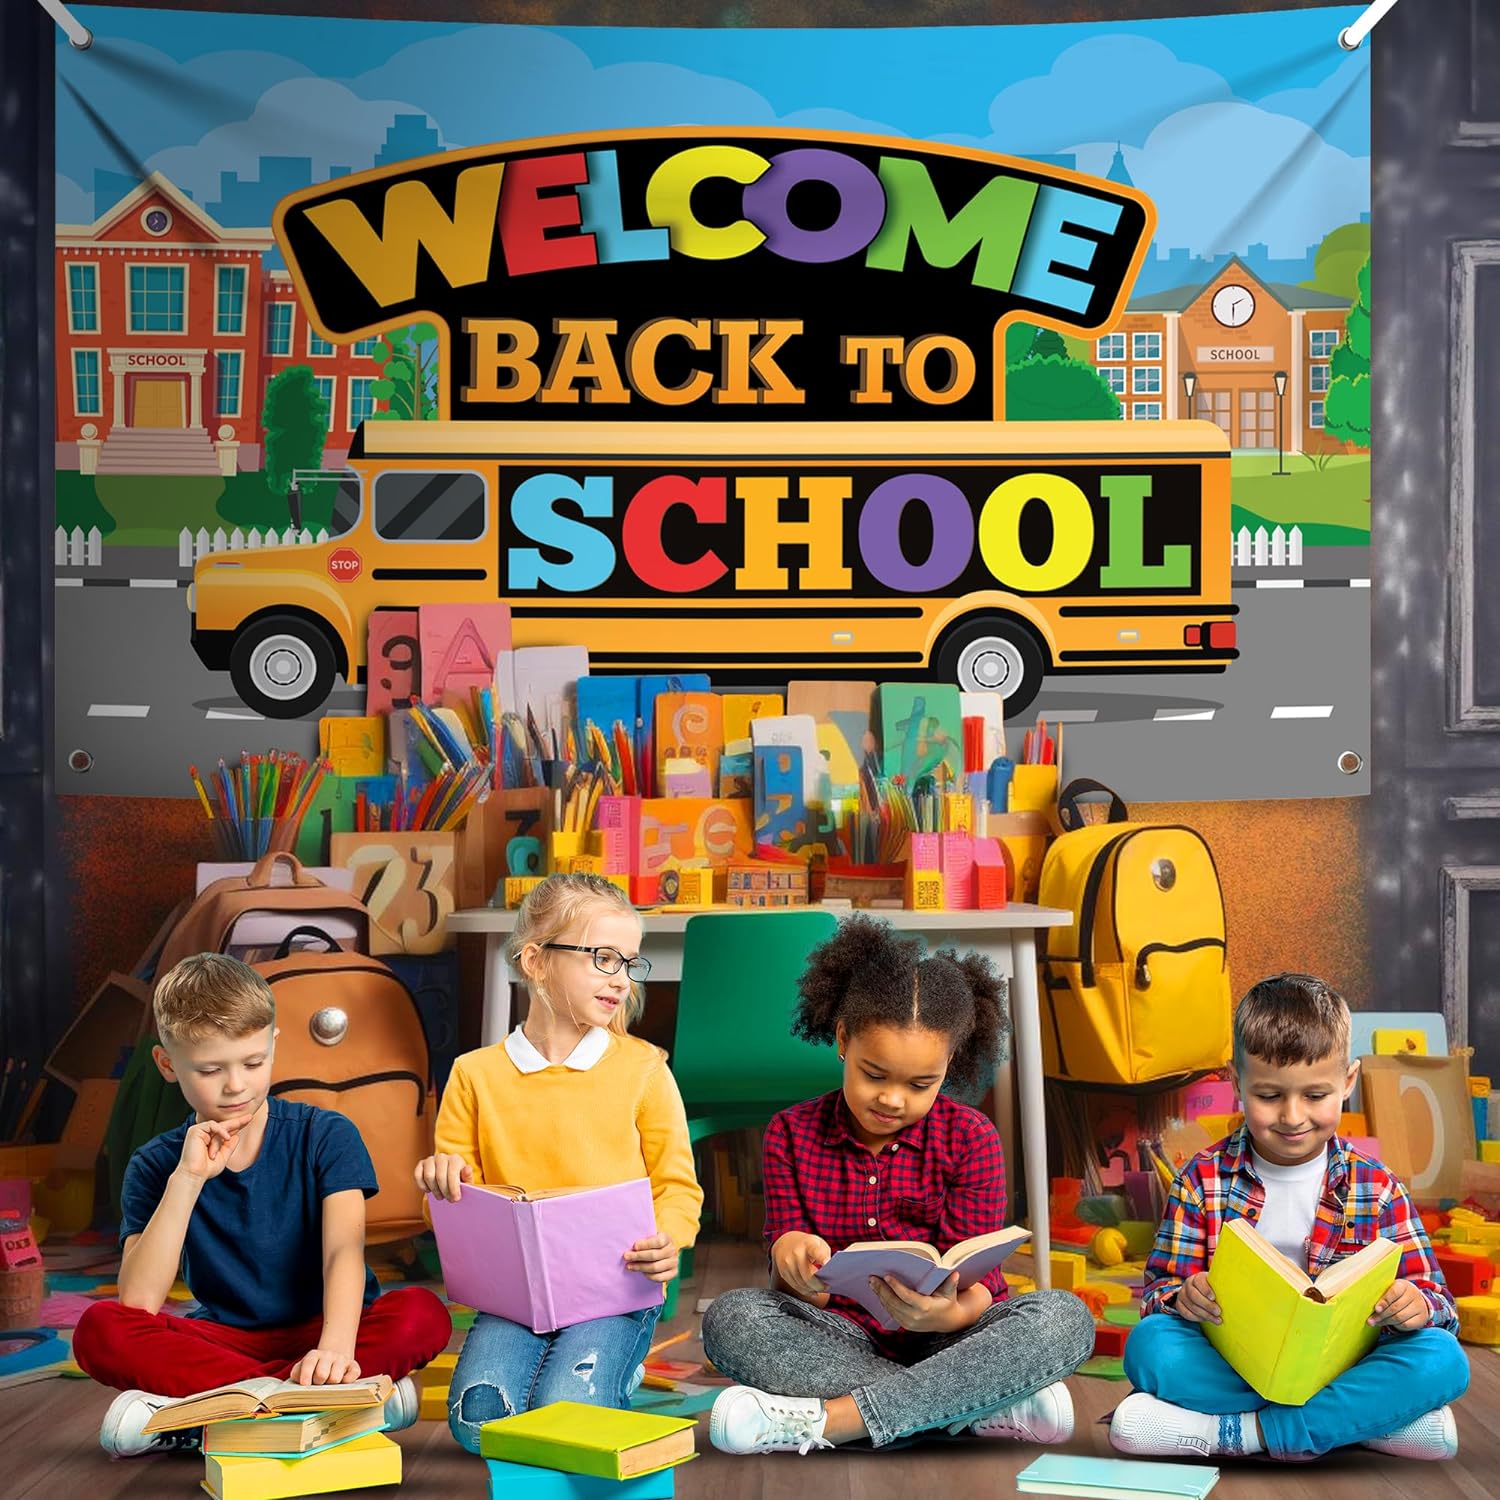 Bulk Welcome Back To School Banner Extra Large 72x44 Inch School Bus Backdrop Perfect for Back To School Decorations and Party Celebrations Wholesale